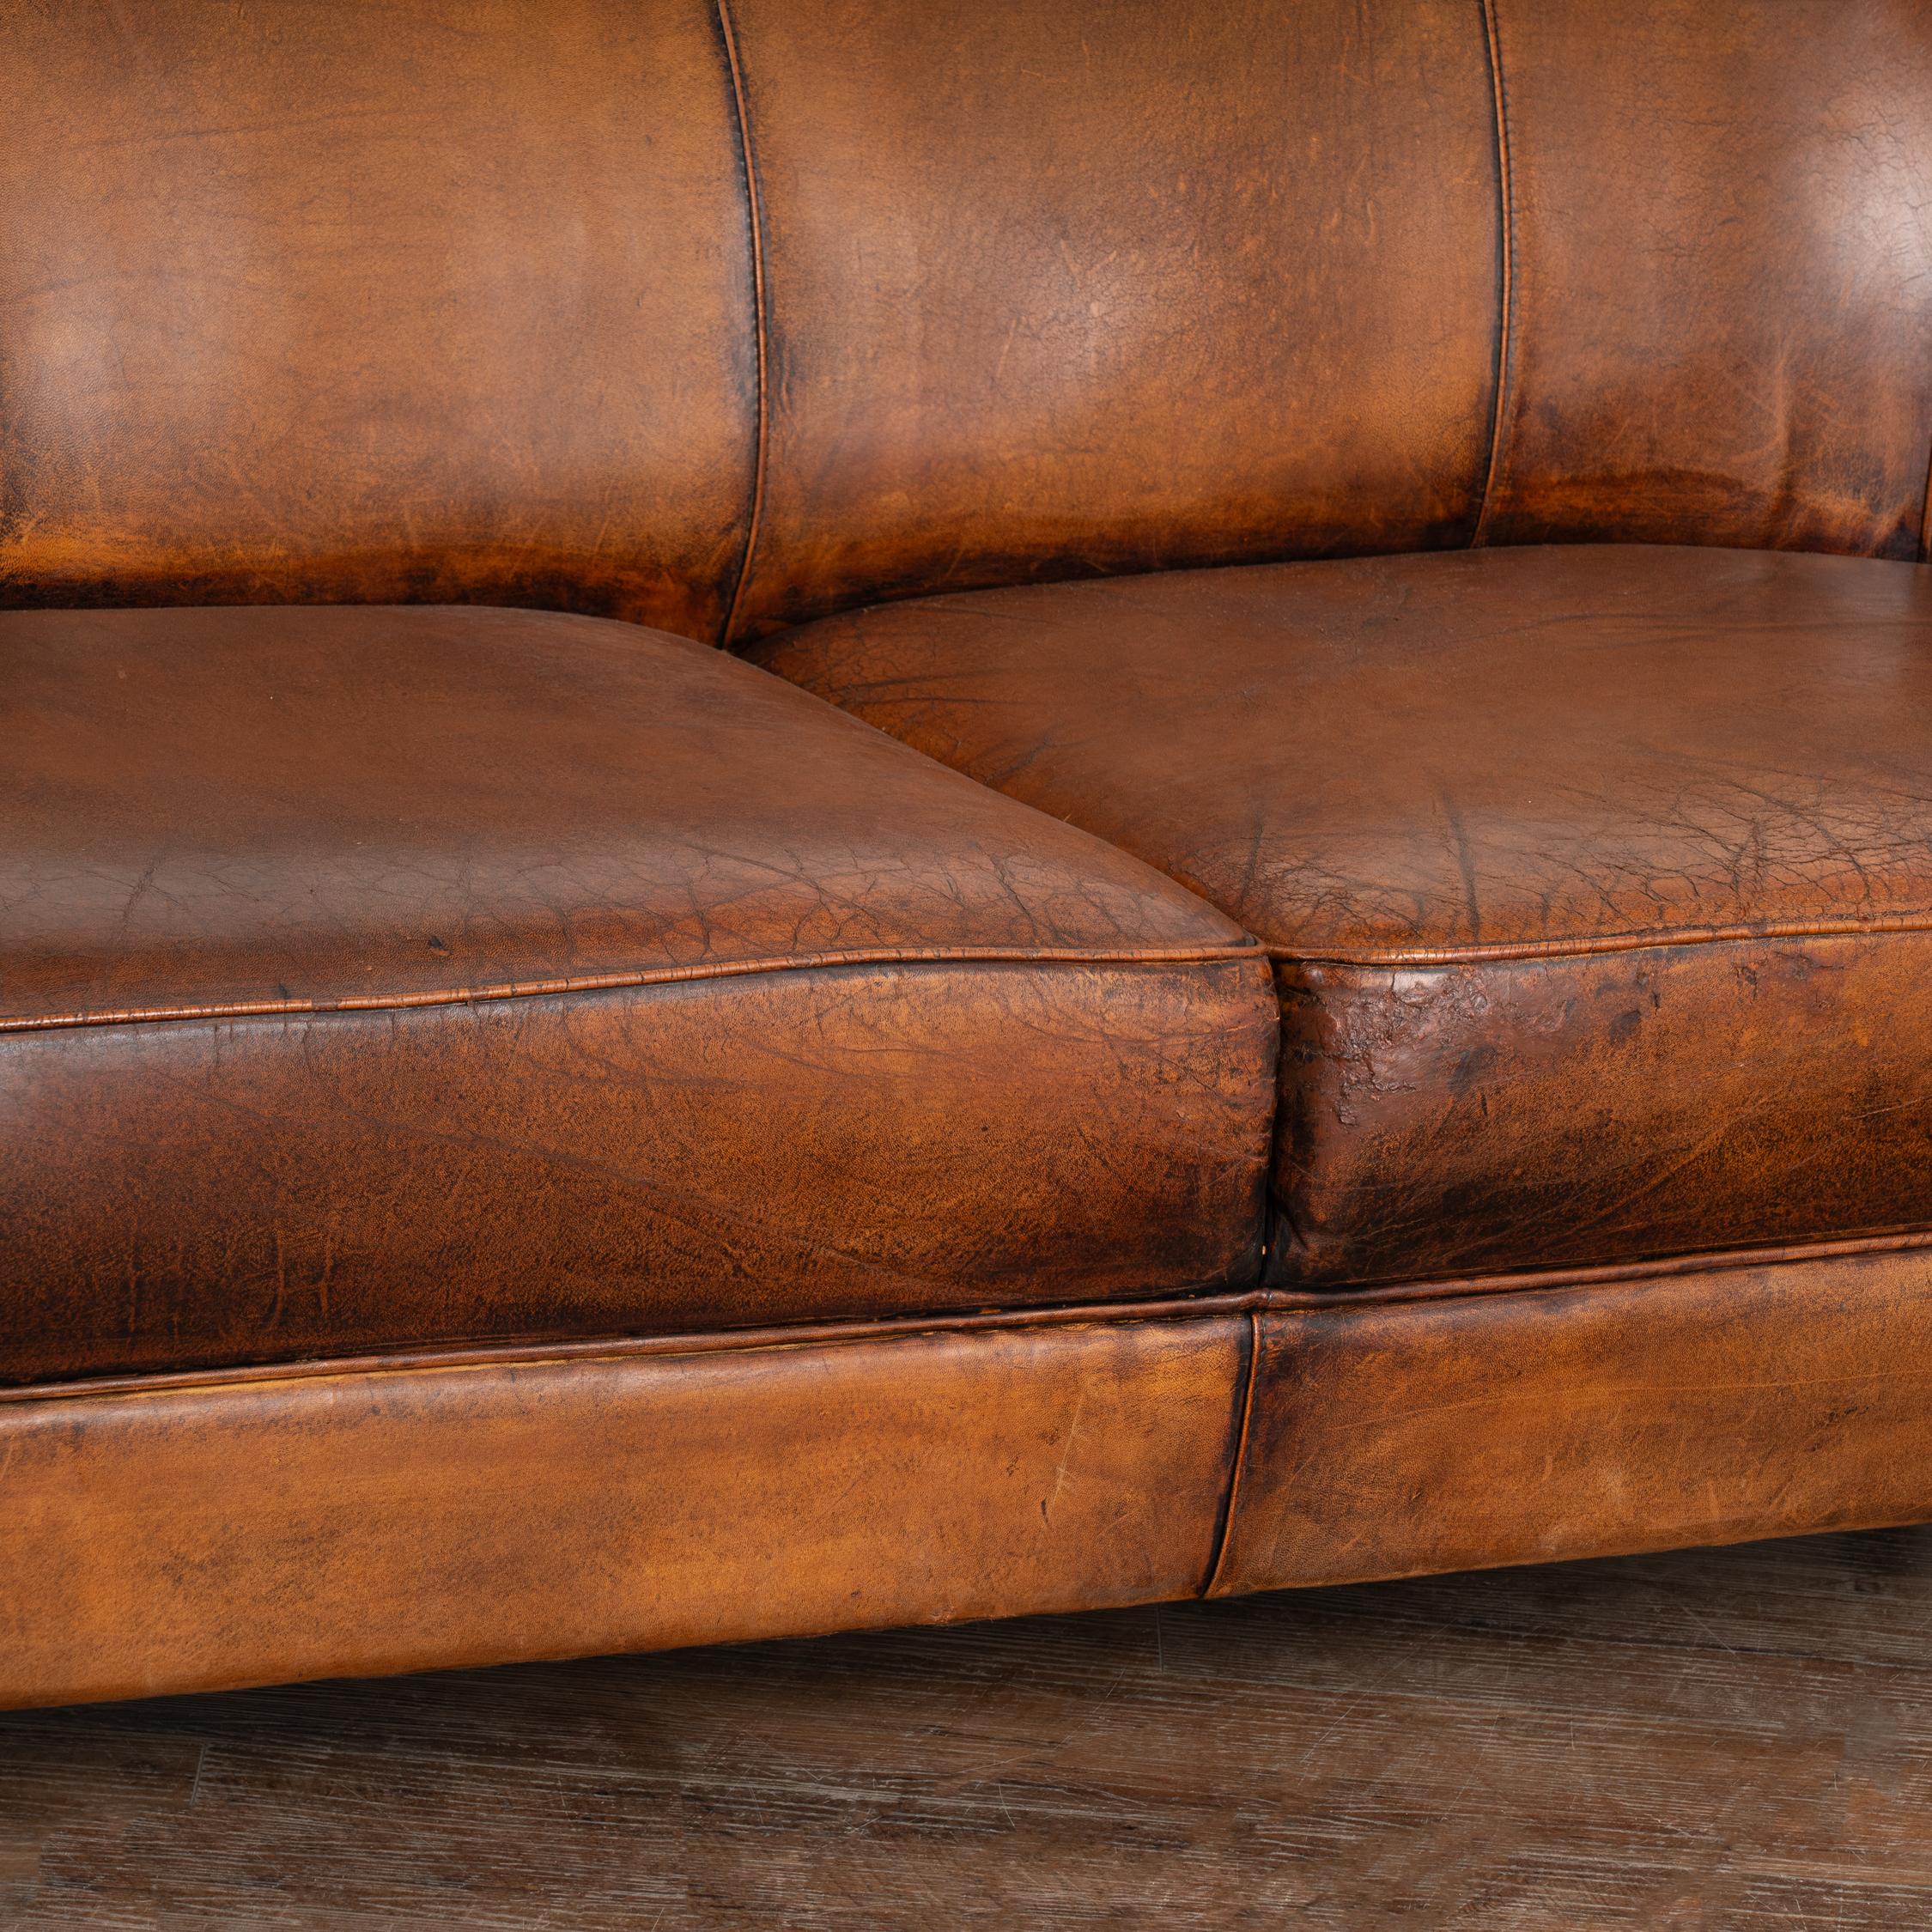 20th Century Vintage Brown Leather 2-Seat Sofa Loveseat from The Netherlands, circa 1960-70